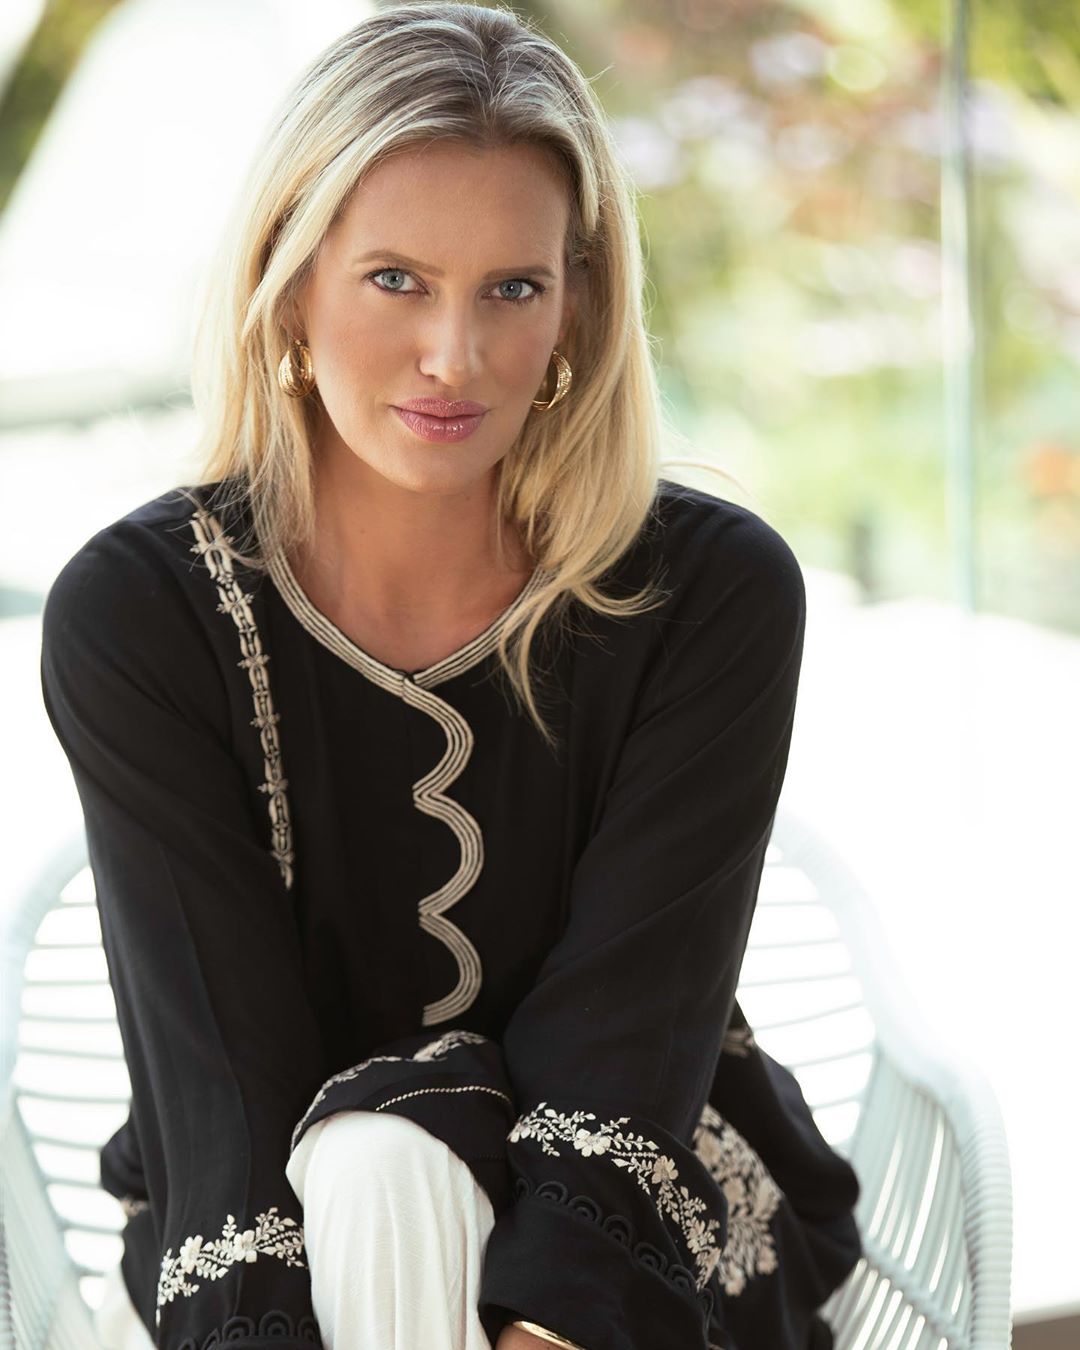 shaniera akram is all set to make her big screen debut